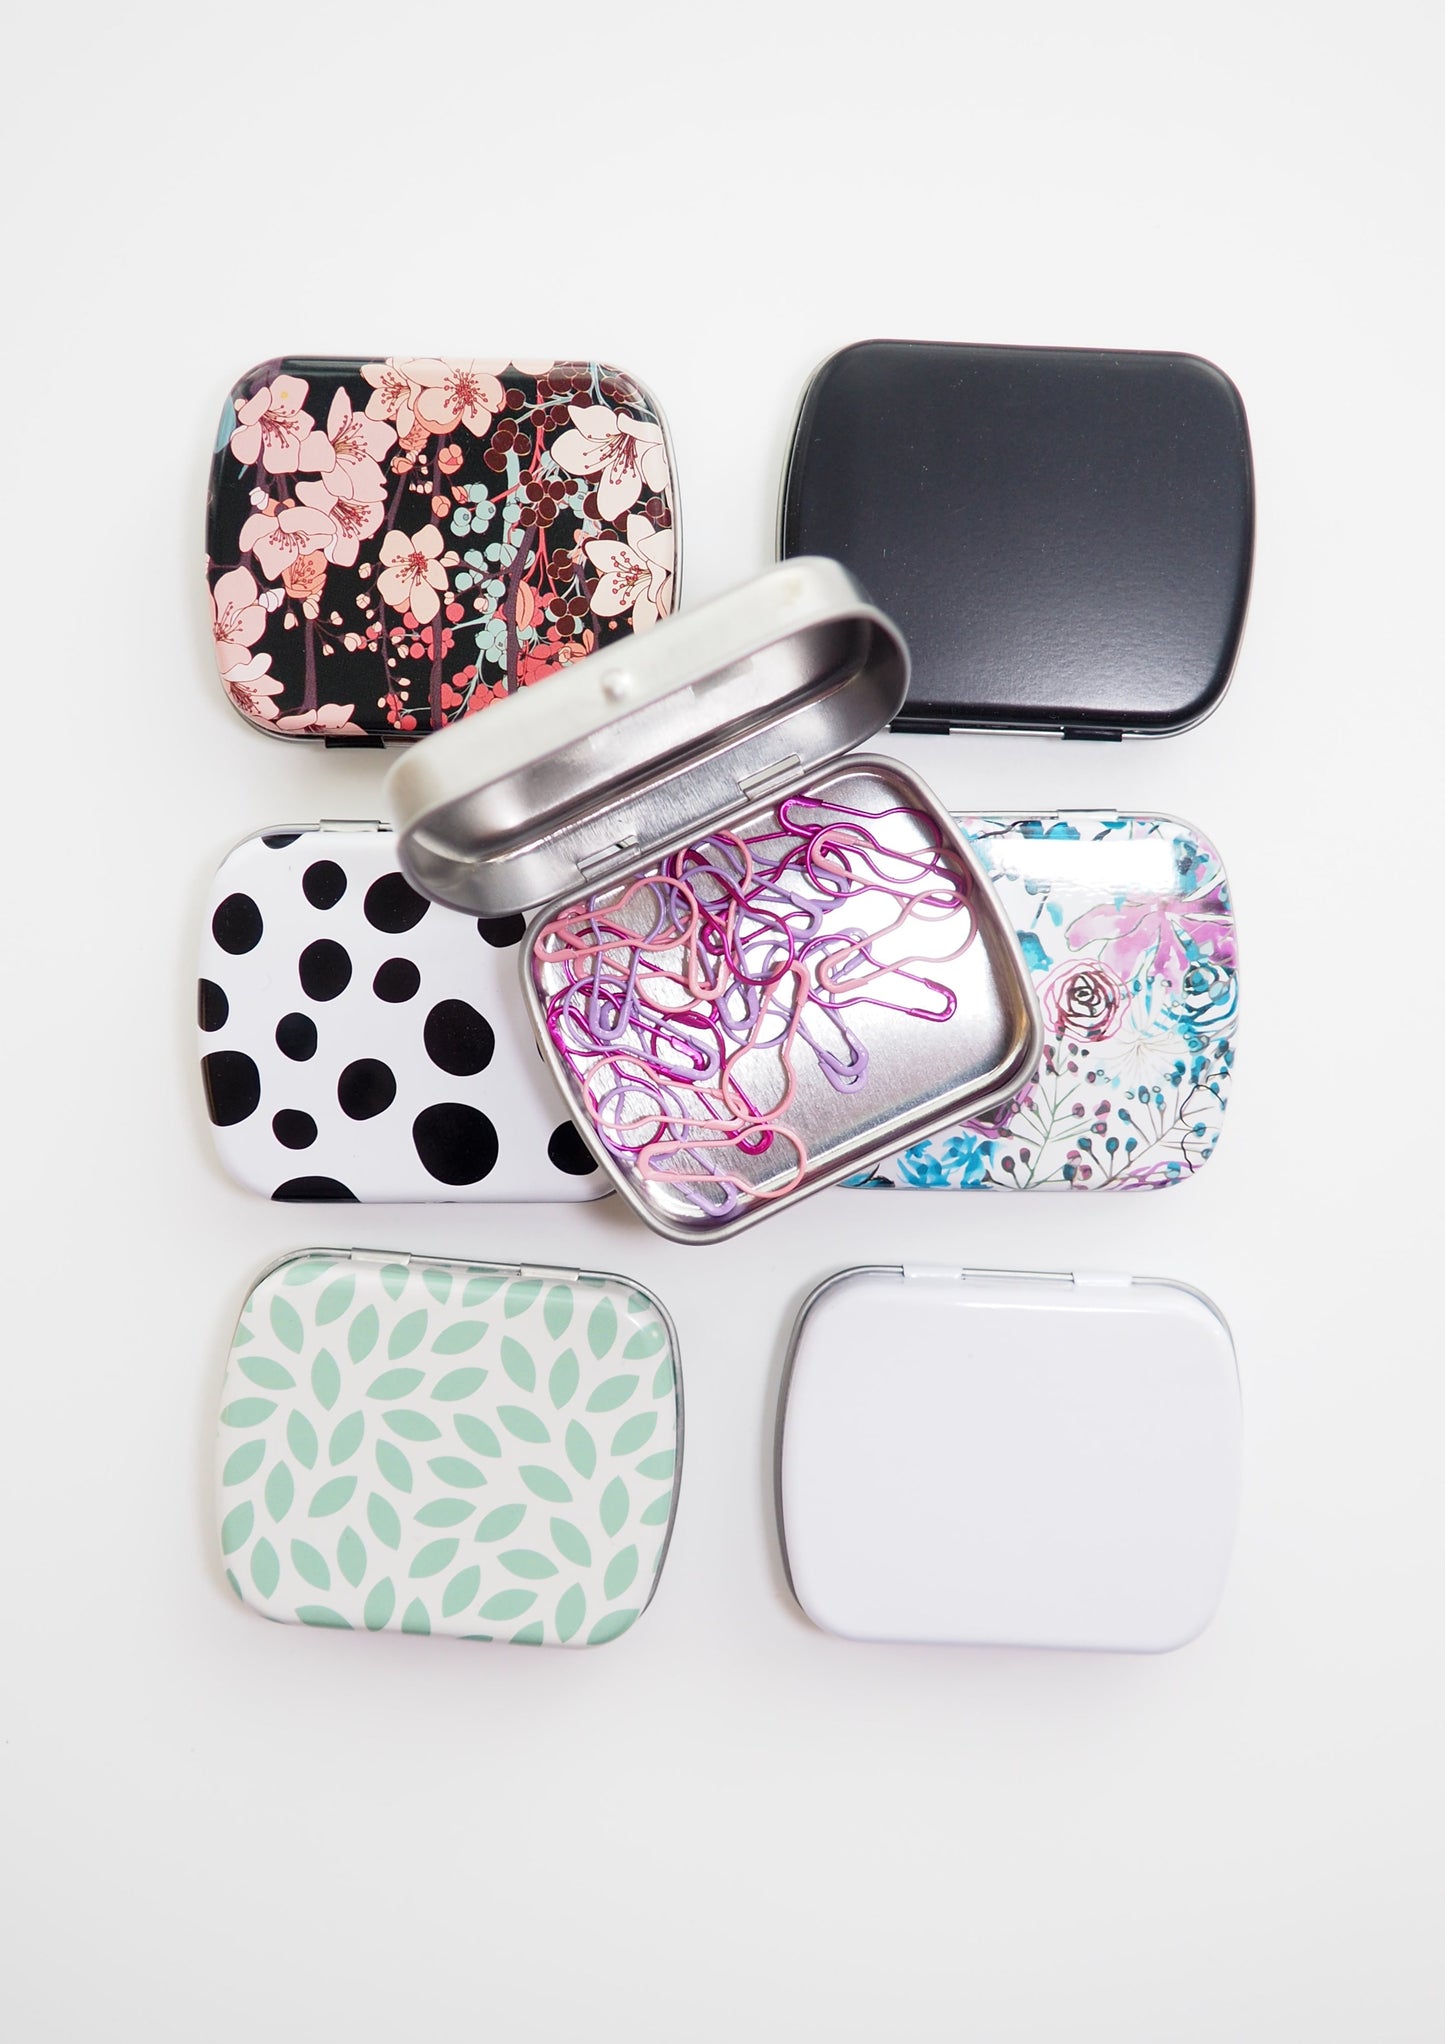 image of metal notion tins. one black with flowers, one with dalmation spots, one white with teal leaves, one blackl, one white, one silver, and one white with flowers